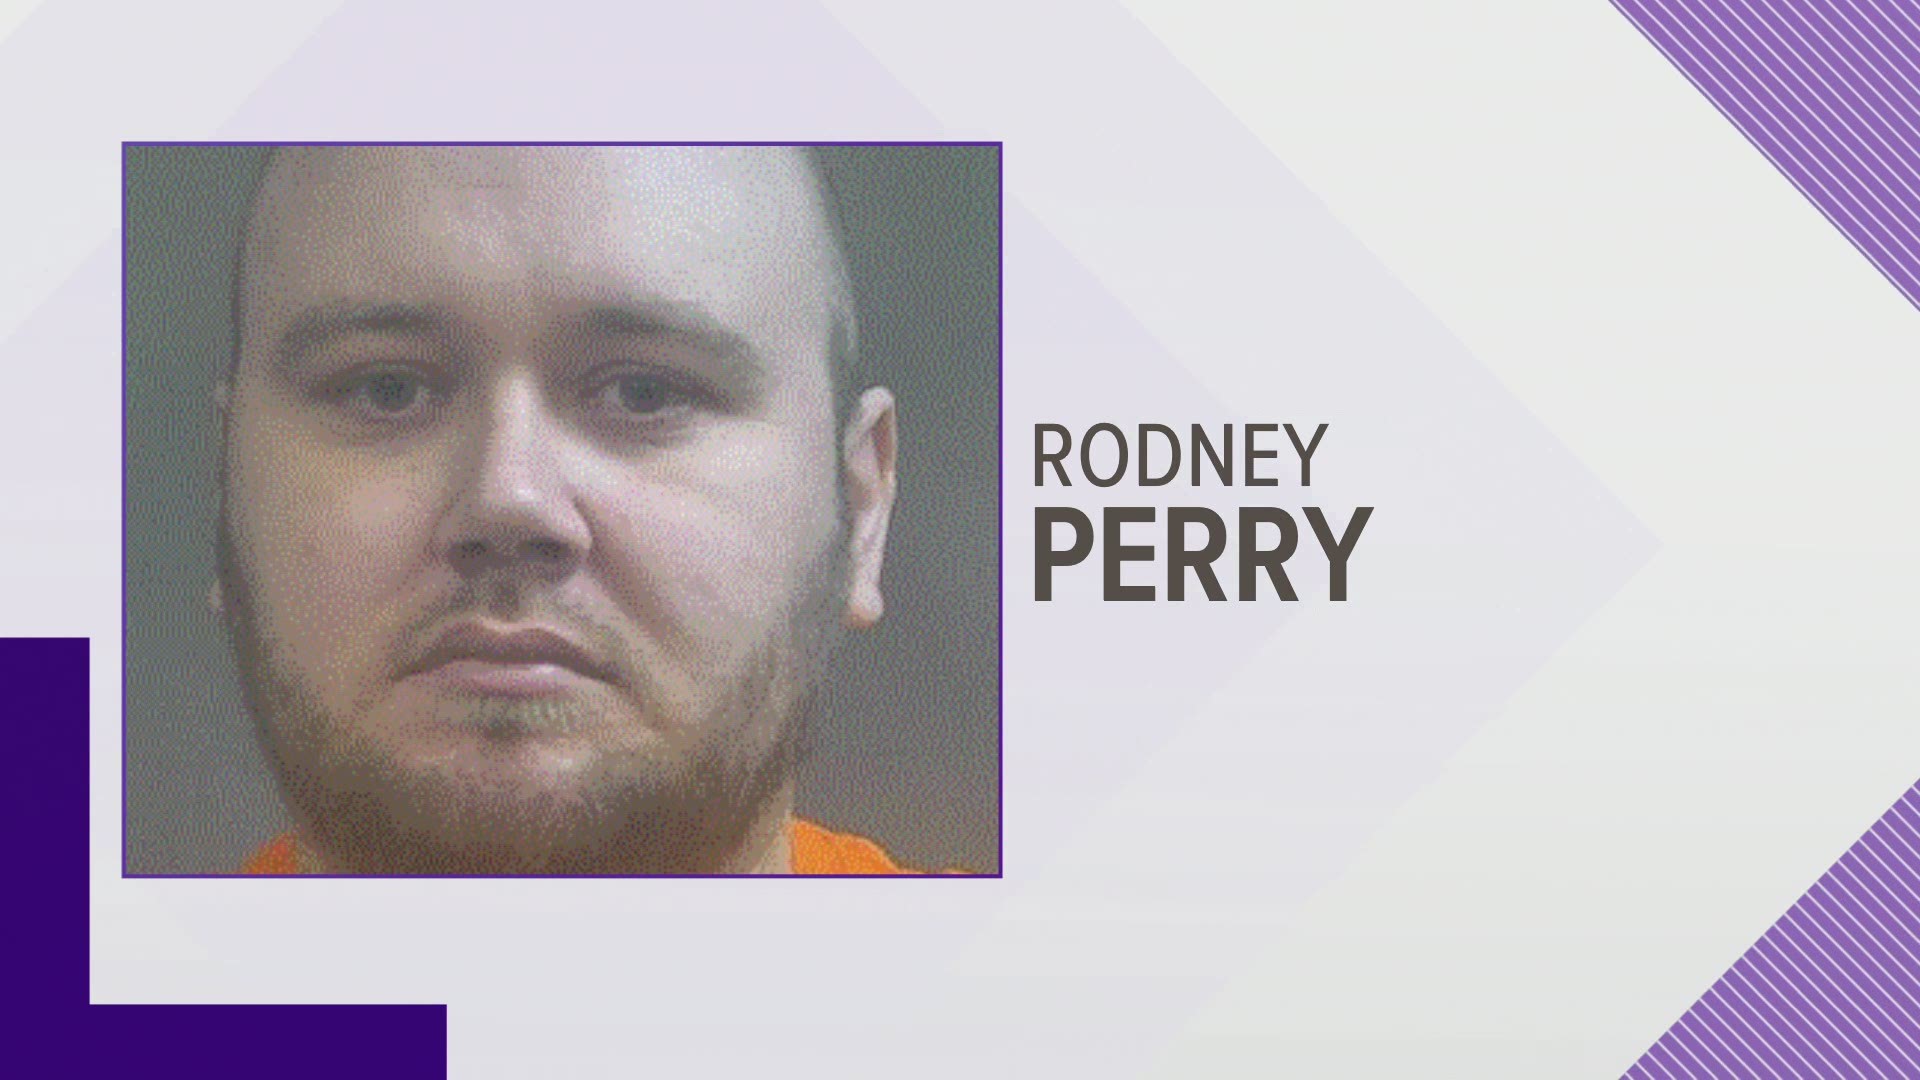 Rodney Maxwell Perry, 33, of Lebanon, was found guilty in May of abusing an 8-year-old child.